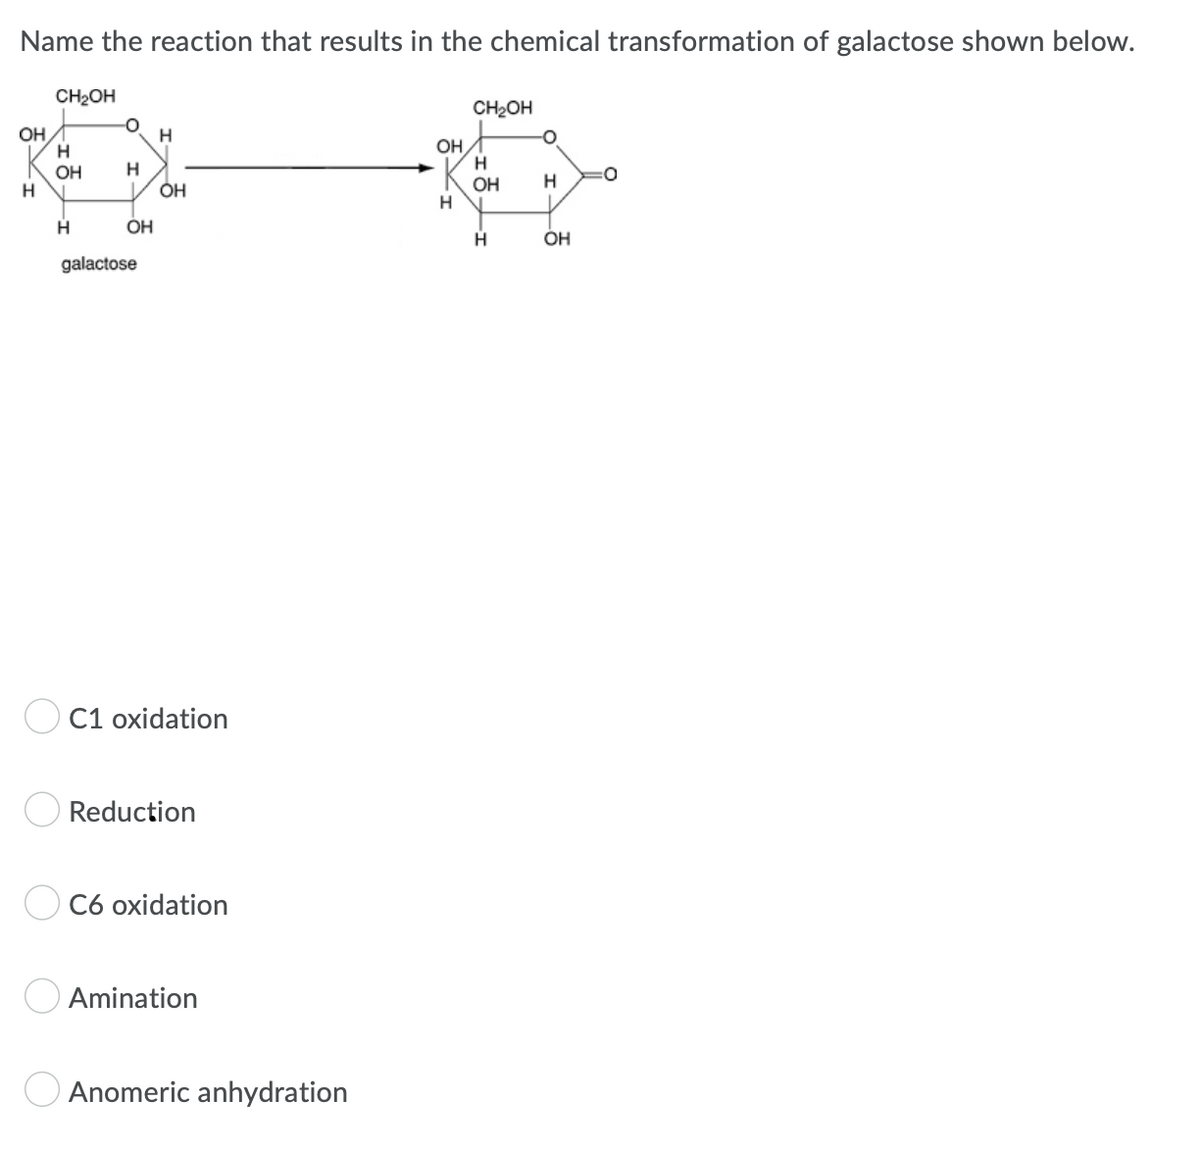 Name the reaction that results in the chemical transformation of galactose shown below.
CH₂OH
CH₂OH
OH
H
H
H
OH
:0
H
OH
OH
H
H
galactose
O C1 oxidation
Reduction
C6 oxidation
Amination
Anomeric anhydration
O
H
OH
OH
H
O
H
OH